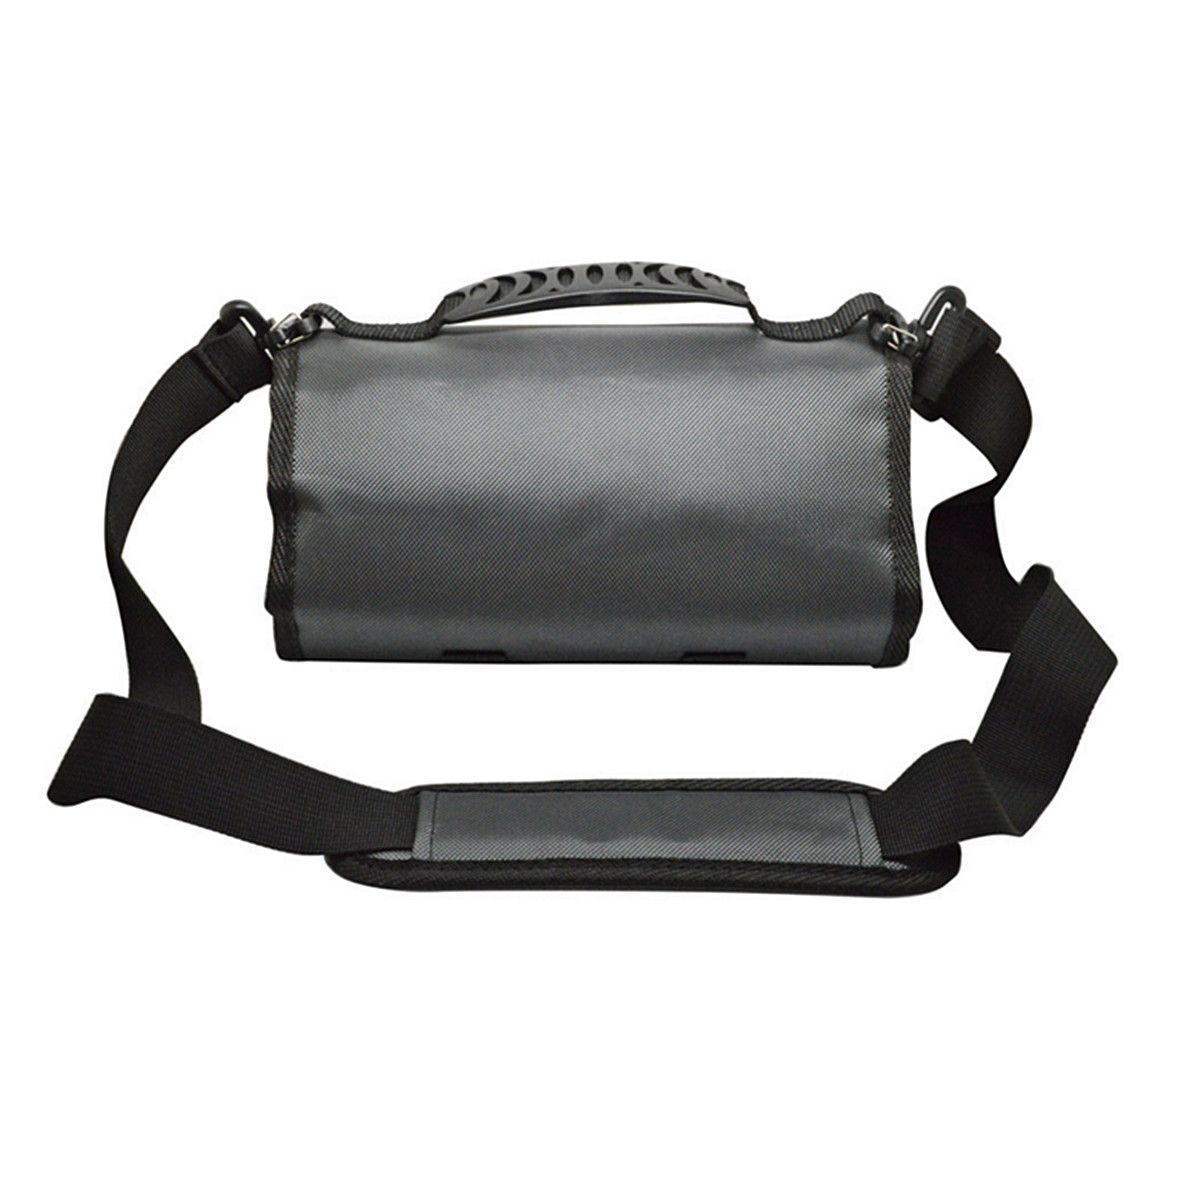 Waterproof-Camera-Bag-Storage-Case-Cover-Roll-Protector-for-Action-Sportscamera-1202189